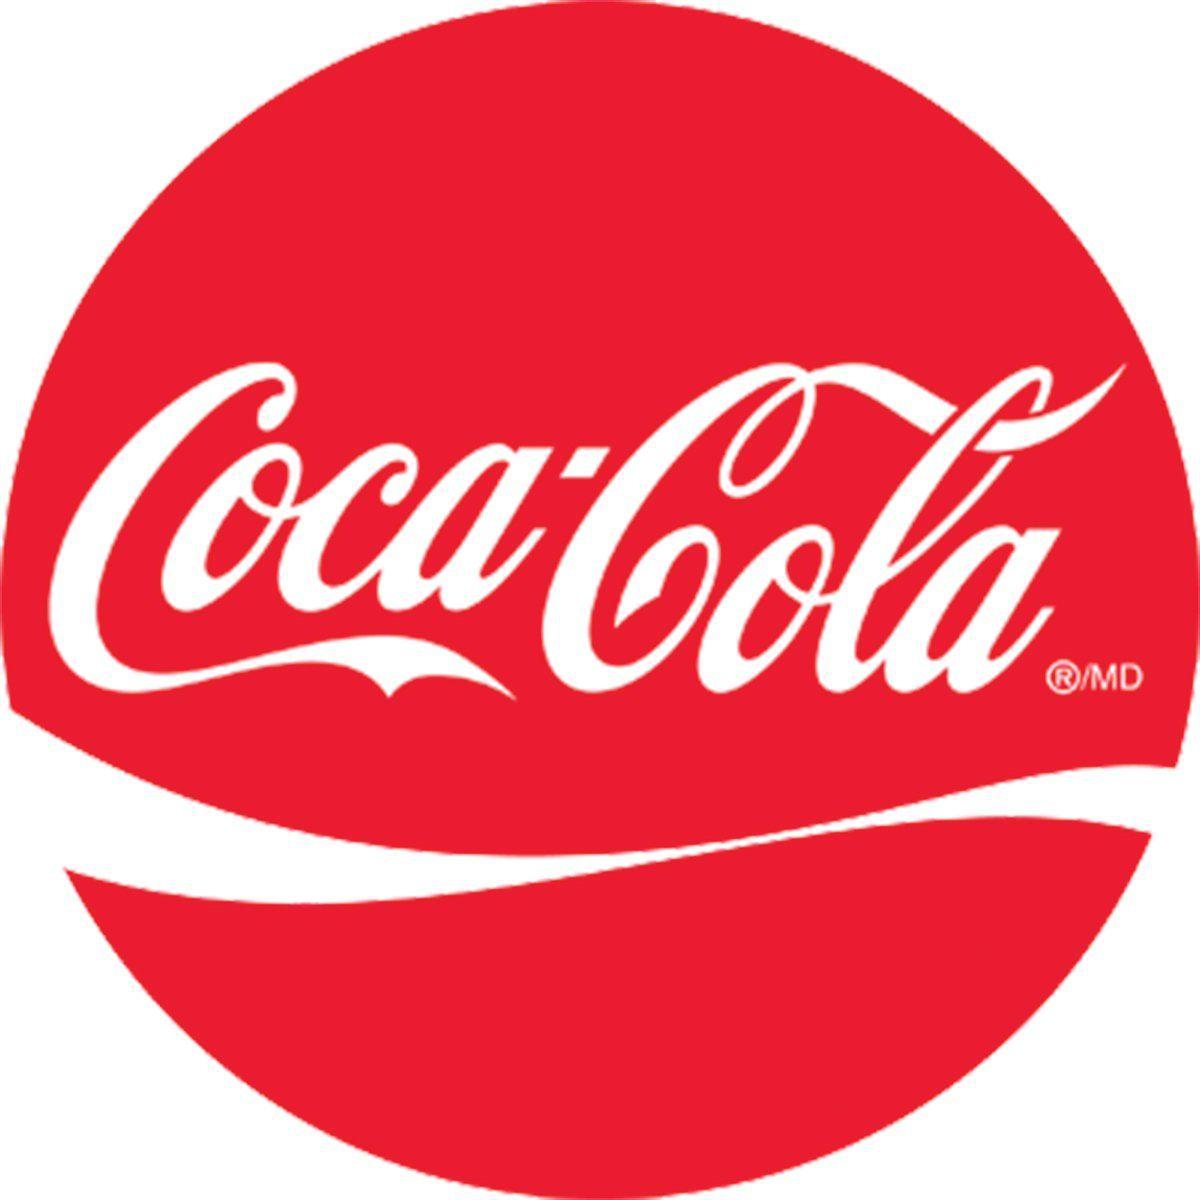 Popular Soda Brand Logo - You Like Your Logo, but Do Your Consumers? | Agency News - Ad Age